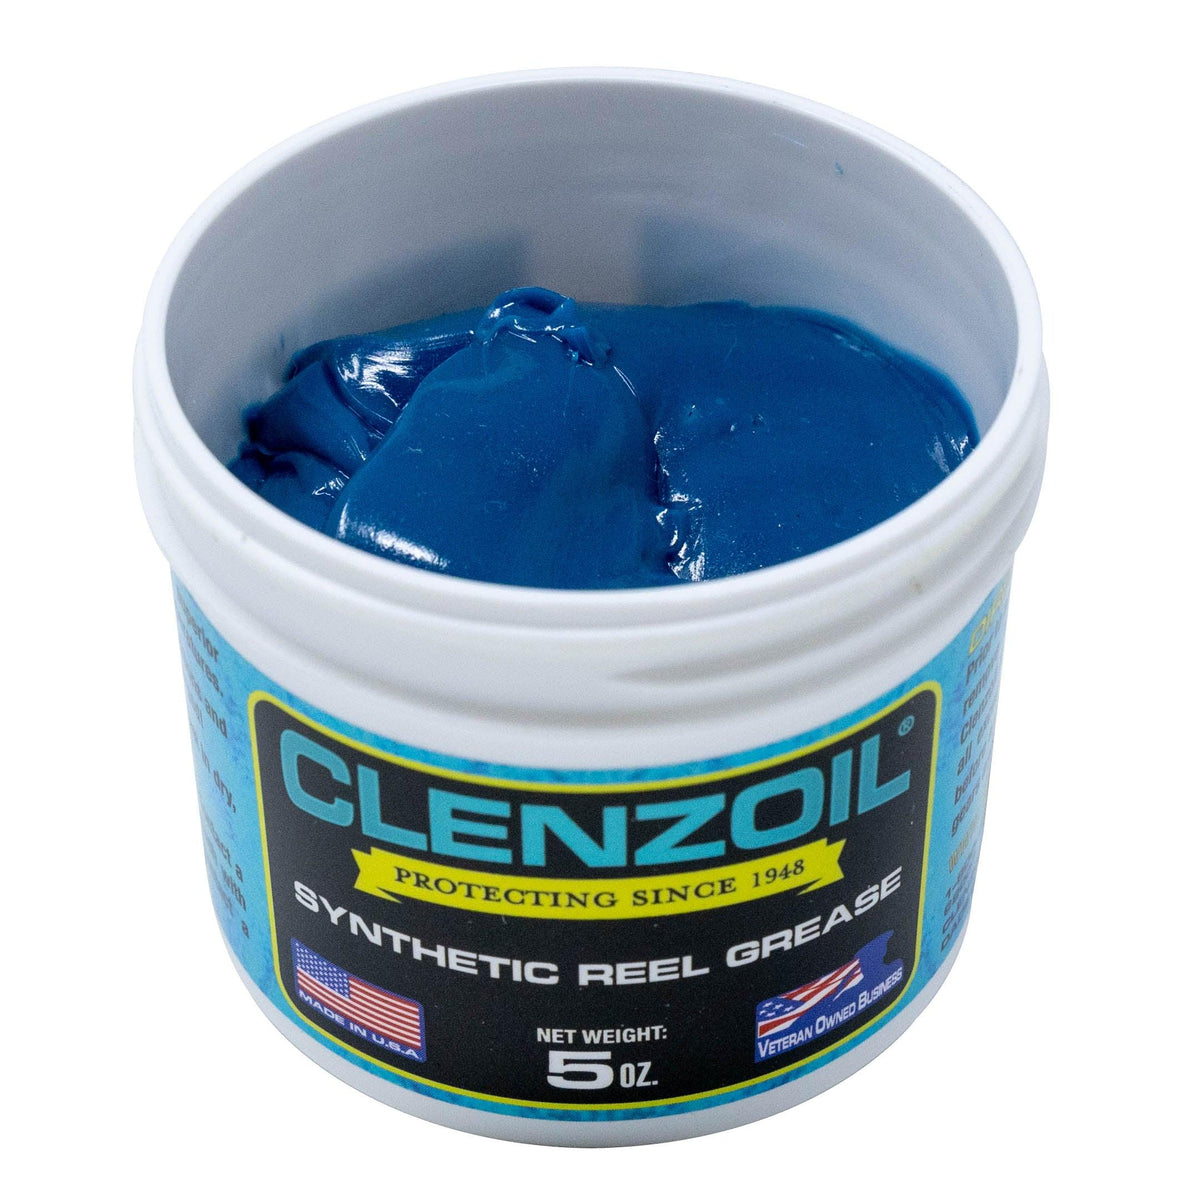 Synthetic Reel Grease - 5 oz. Jar – Clenzoil